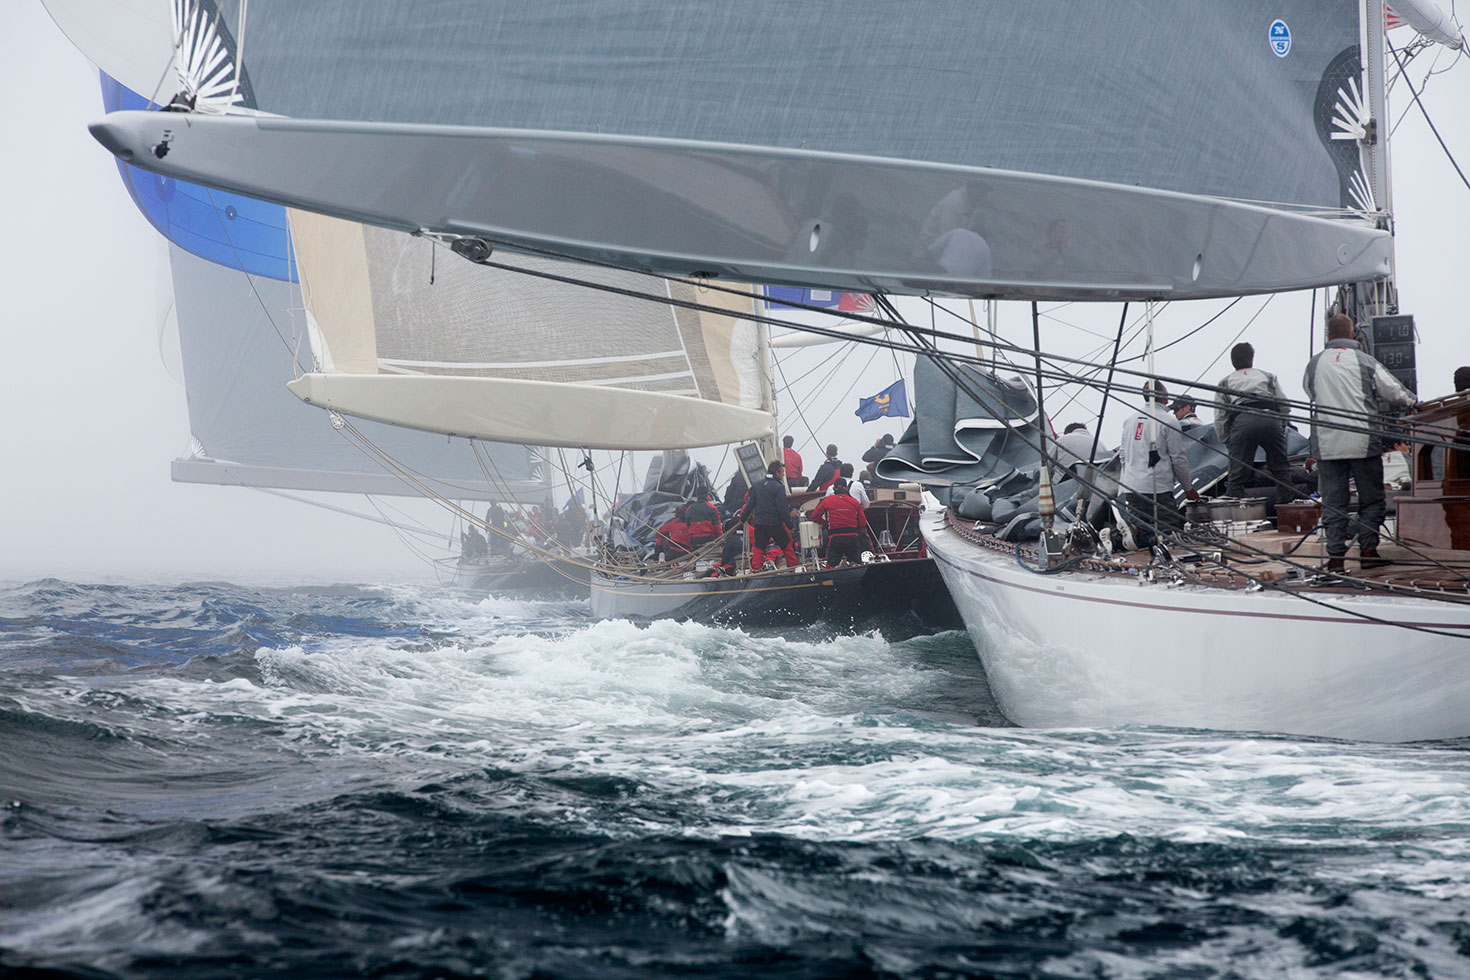 Photo: Lionheart leads Velsheda and lastly Ranger on a downwind leg (looks great blown up) at the J Class Falmouth 2012 © Emily Harris Photography